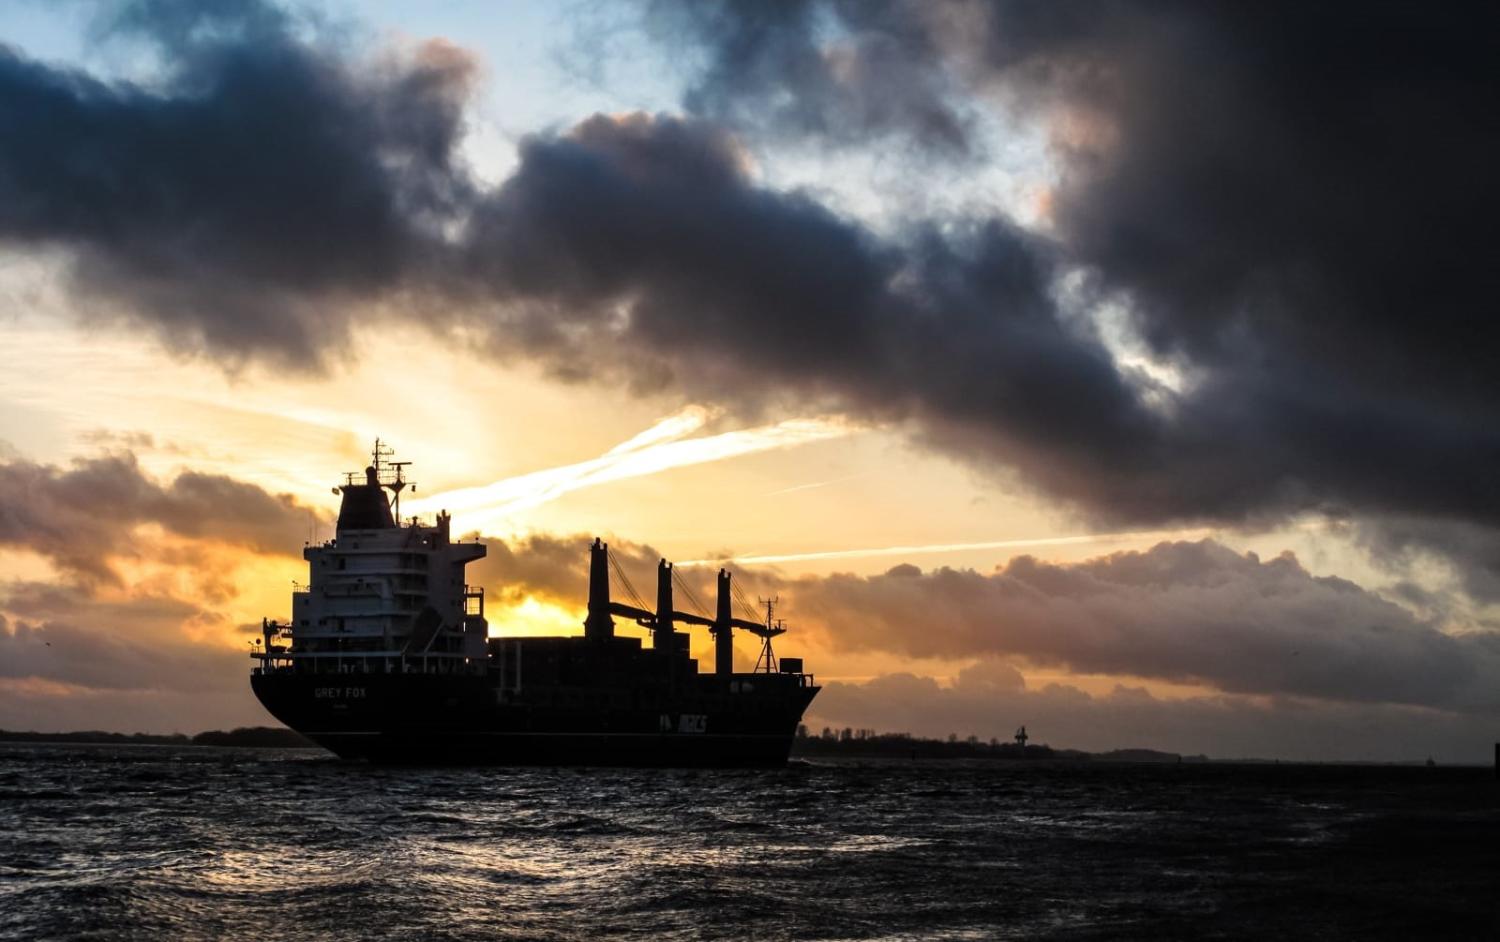 In 2021, 6,170 individual foreign flagged vessels called at Australian ports - by contrast, there are only four Australian flagged vessels on international trade (Jens Rademacher/Unsplash)